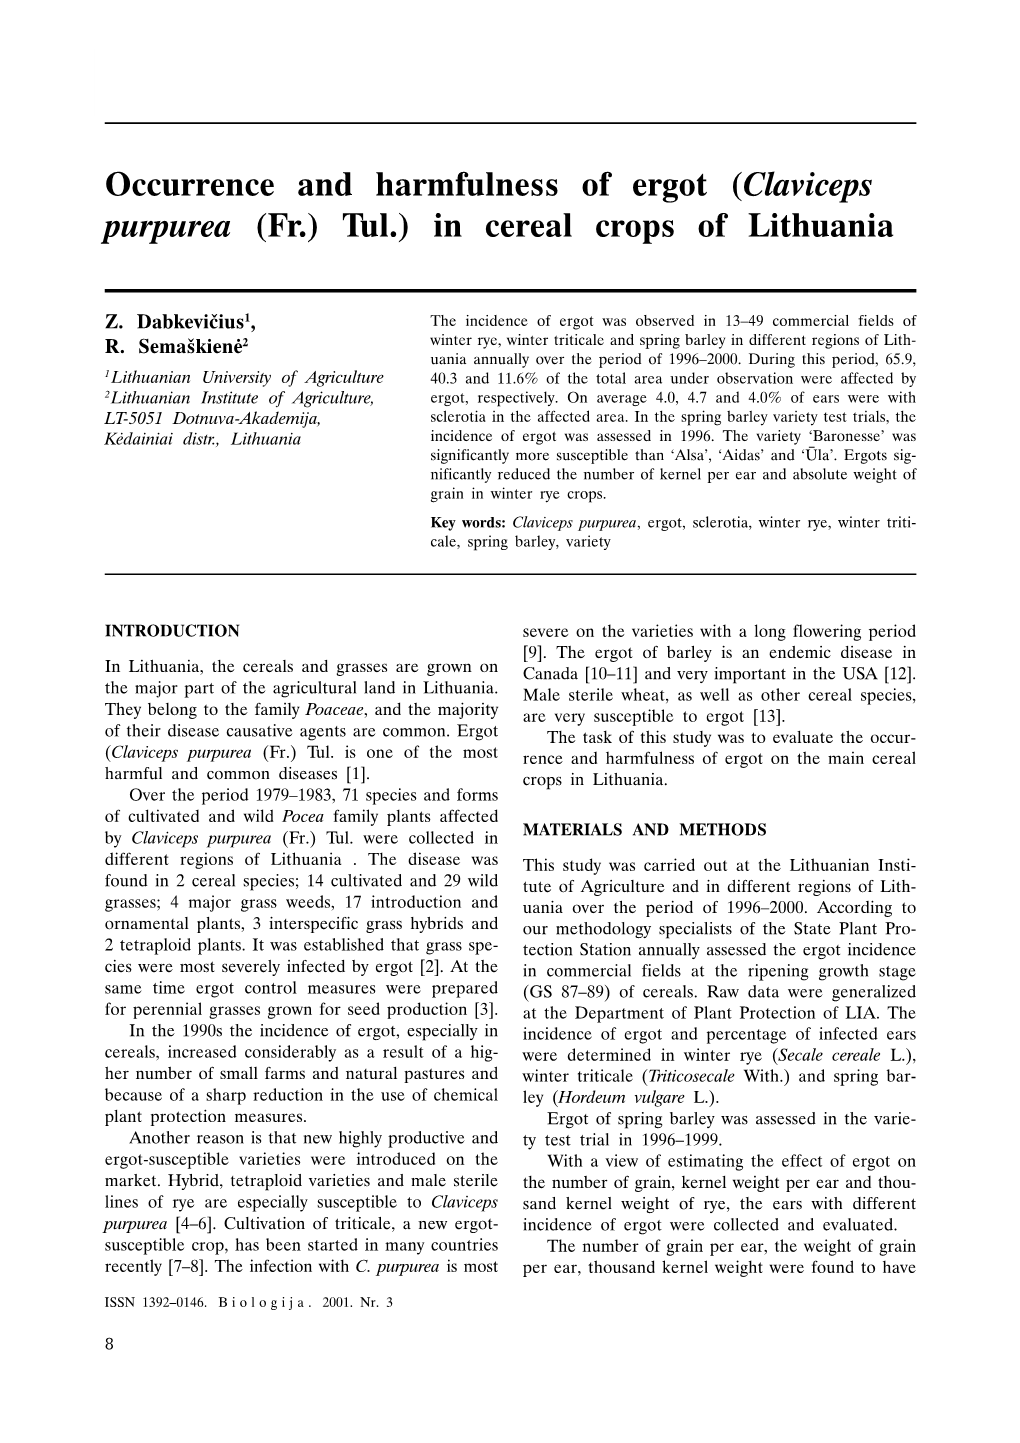 (Claviceps Purpurea (Fr.) Tul.) in Cereal Crops of Lithuania